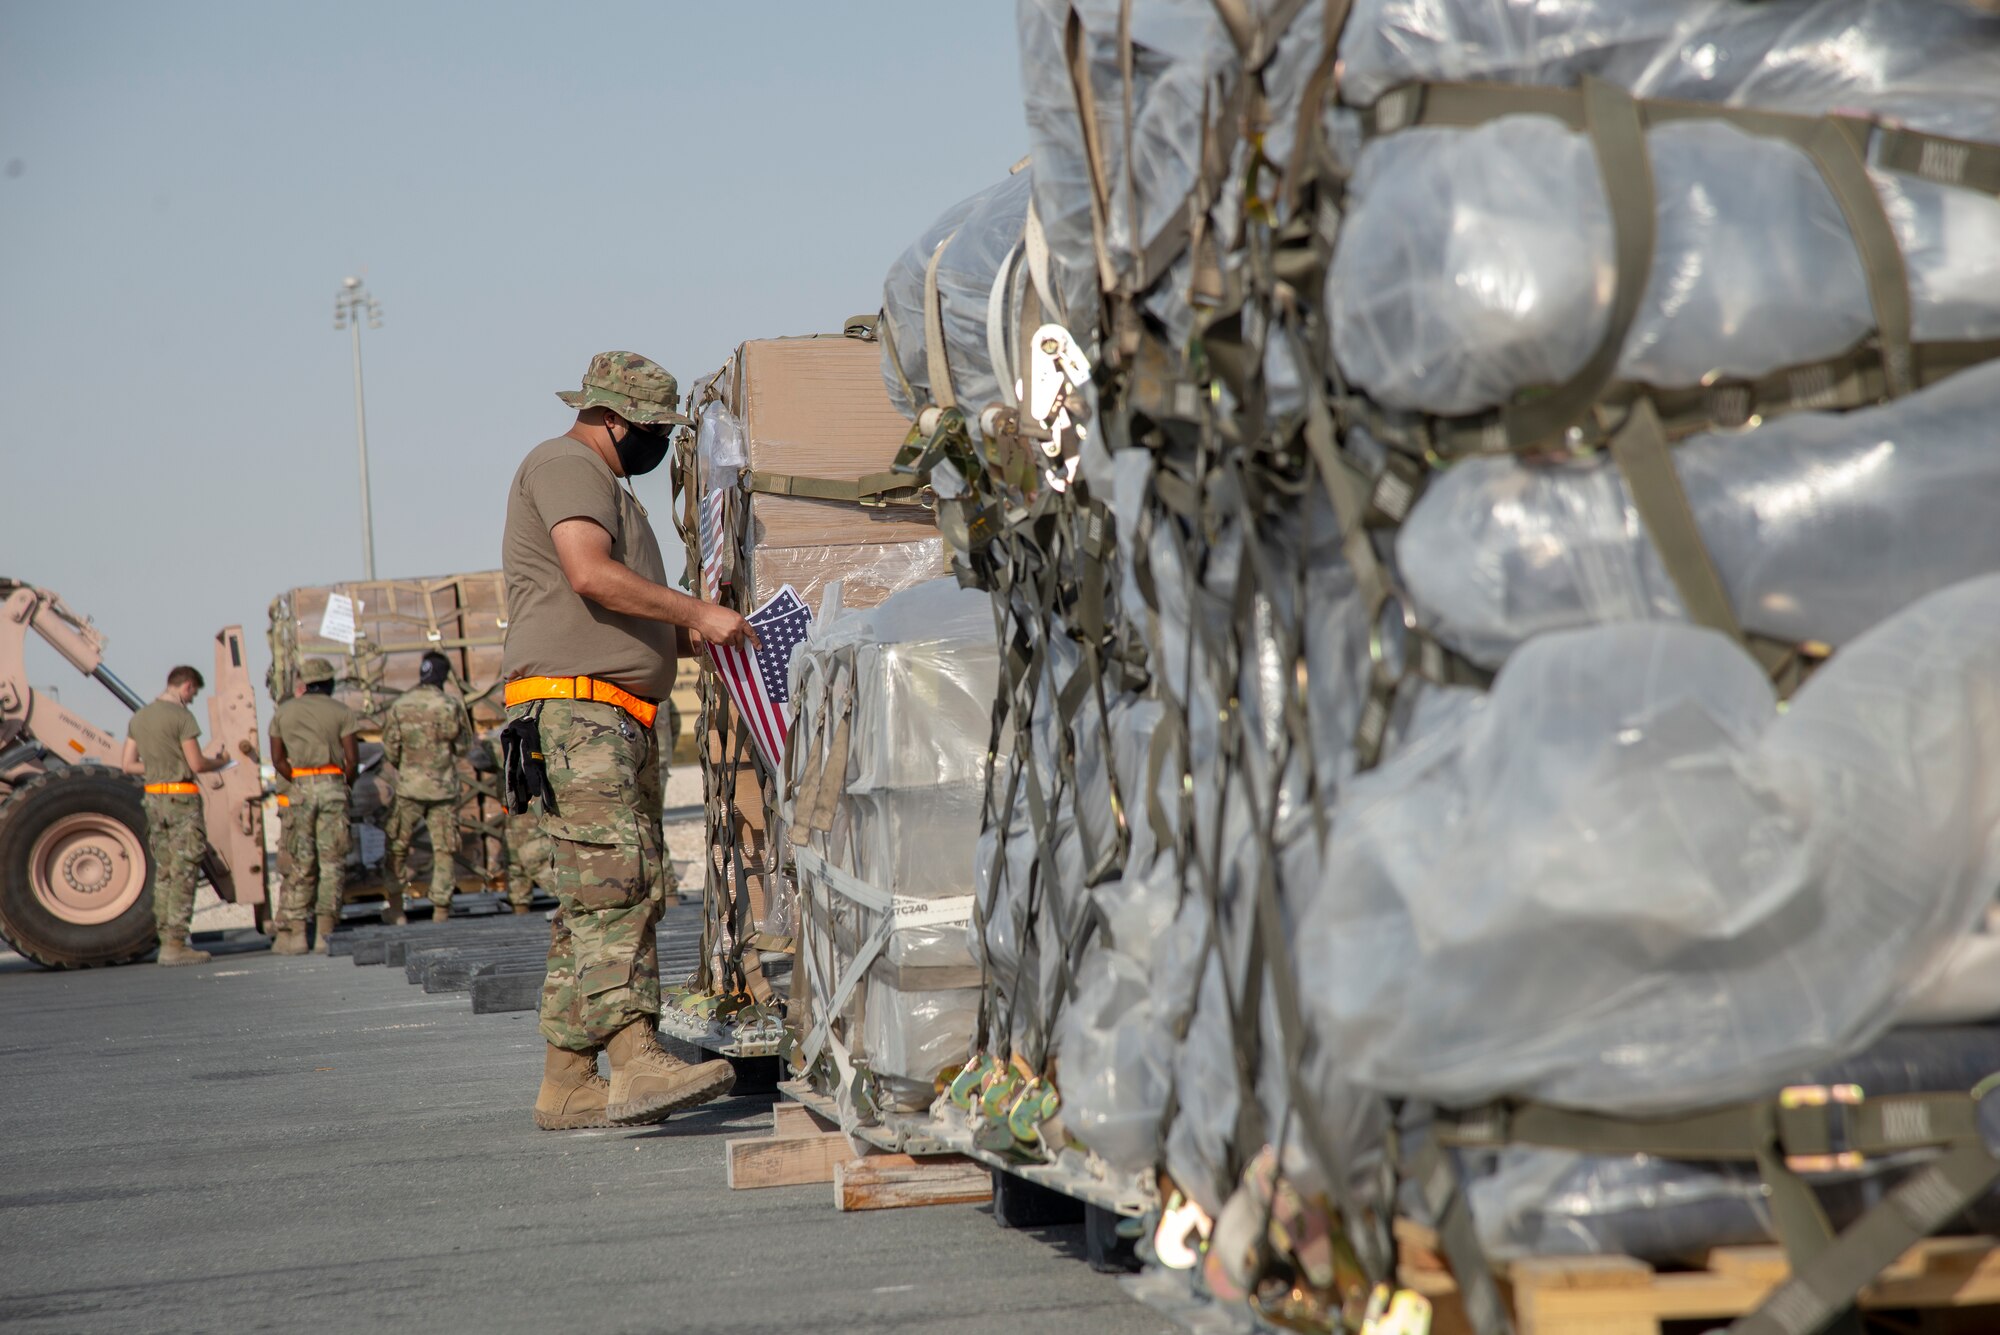 U.S. Air Force Airmen prepare to load humanitarian aid supplies onto a U.S. Air Force C-17 Globemaster III at Al Udeid Air Base, Qatar, Aug. 6, 2020, bound for Beirut, Lebanon. U.S. Central Command is coordinating with the Lebanese Armed Forces and U.S. Embassy-Beirut to transport critical supplies as quickly as possible to support the needs of the Lebanese people. (U.S. Air Force photo by Staff Sgt. Heather Fejerang)